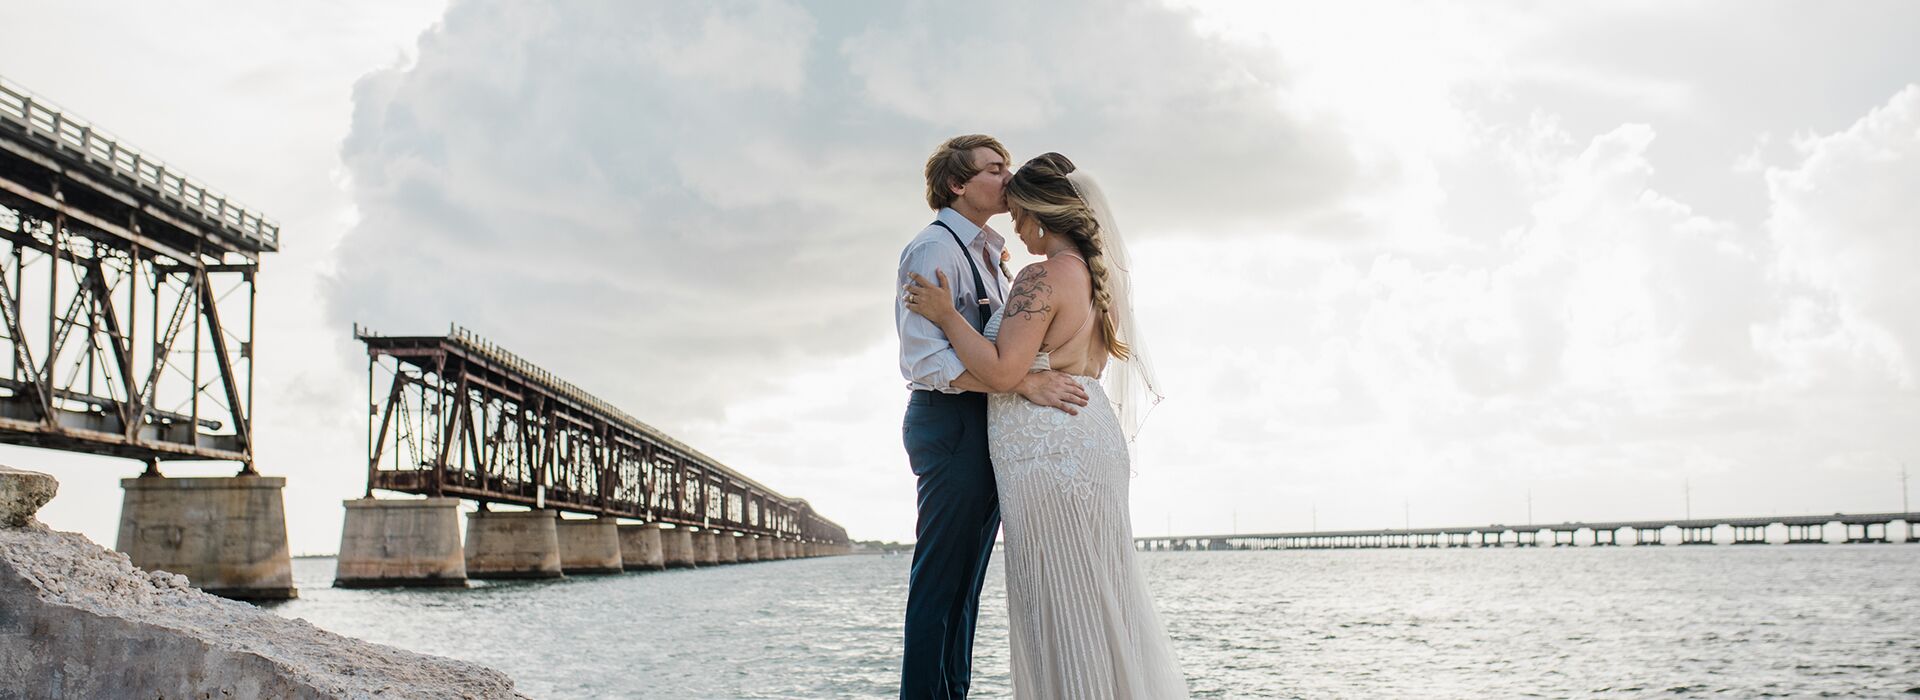 Places to Elope In Florida Keys